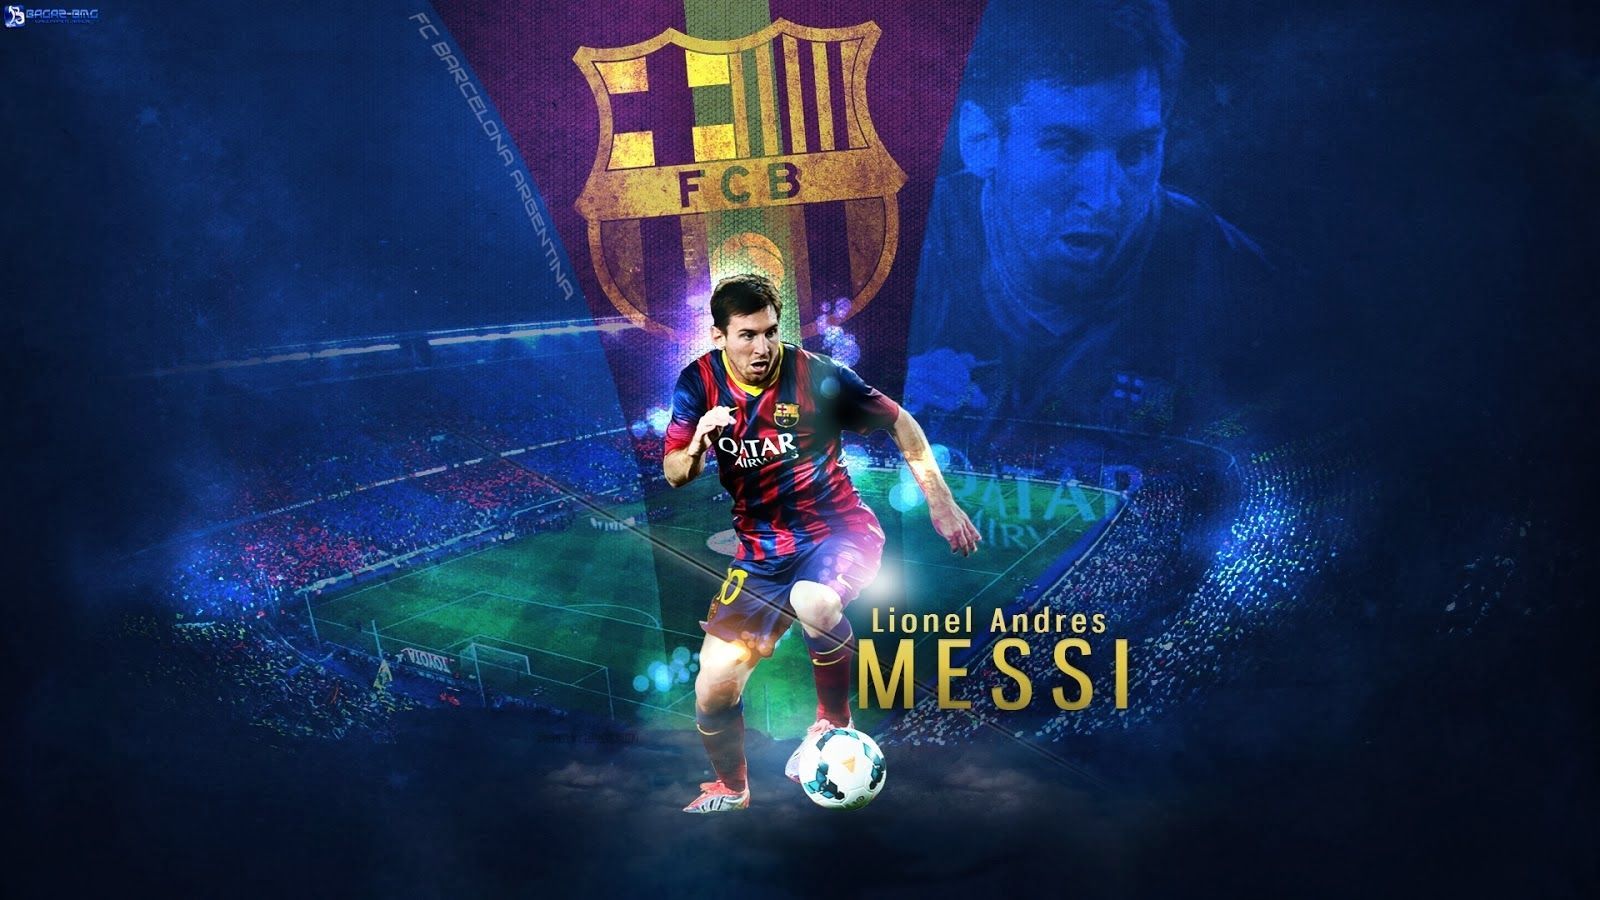 Lionel Messi Cool Wallpaper Free Lionel Messi Cool